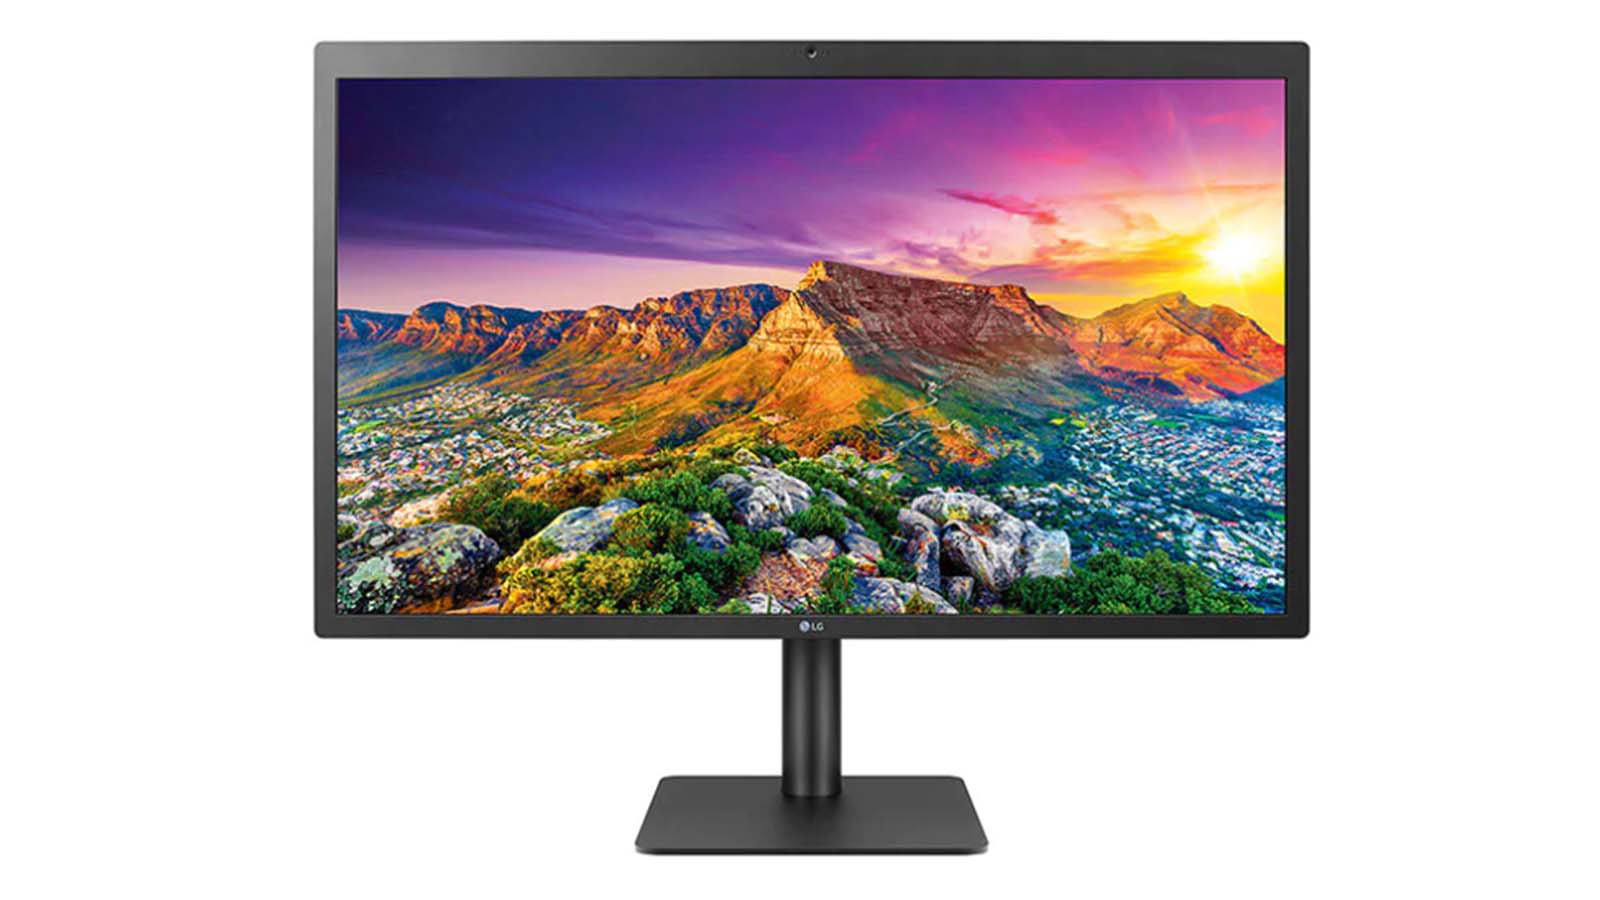 Samsung M8 Smart Monitor review